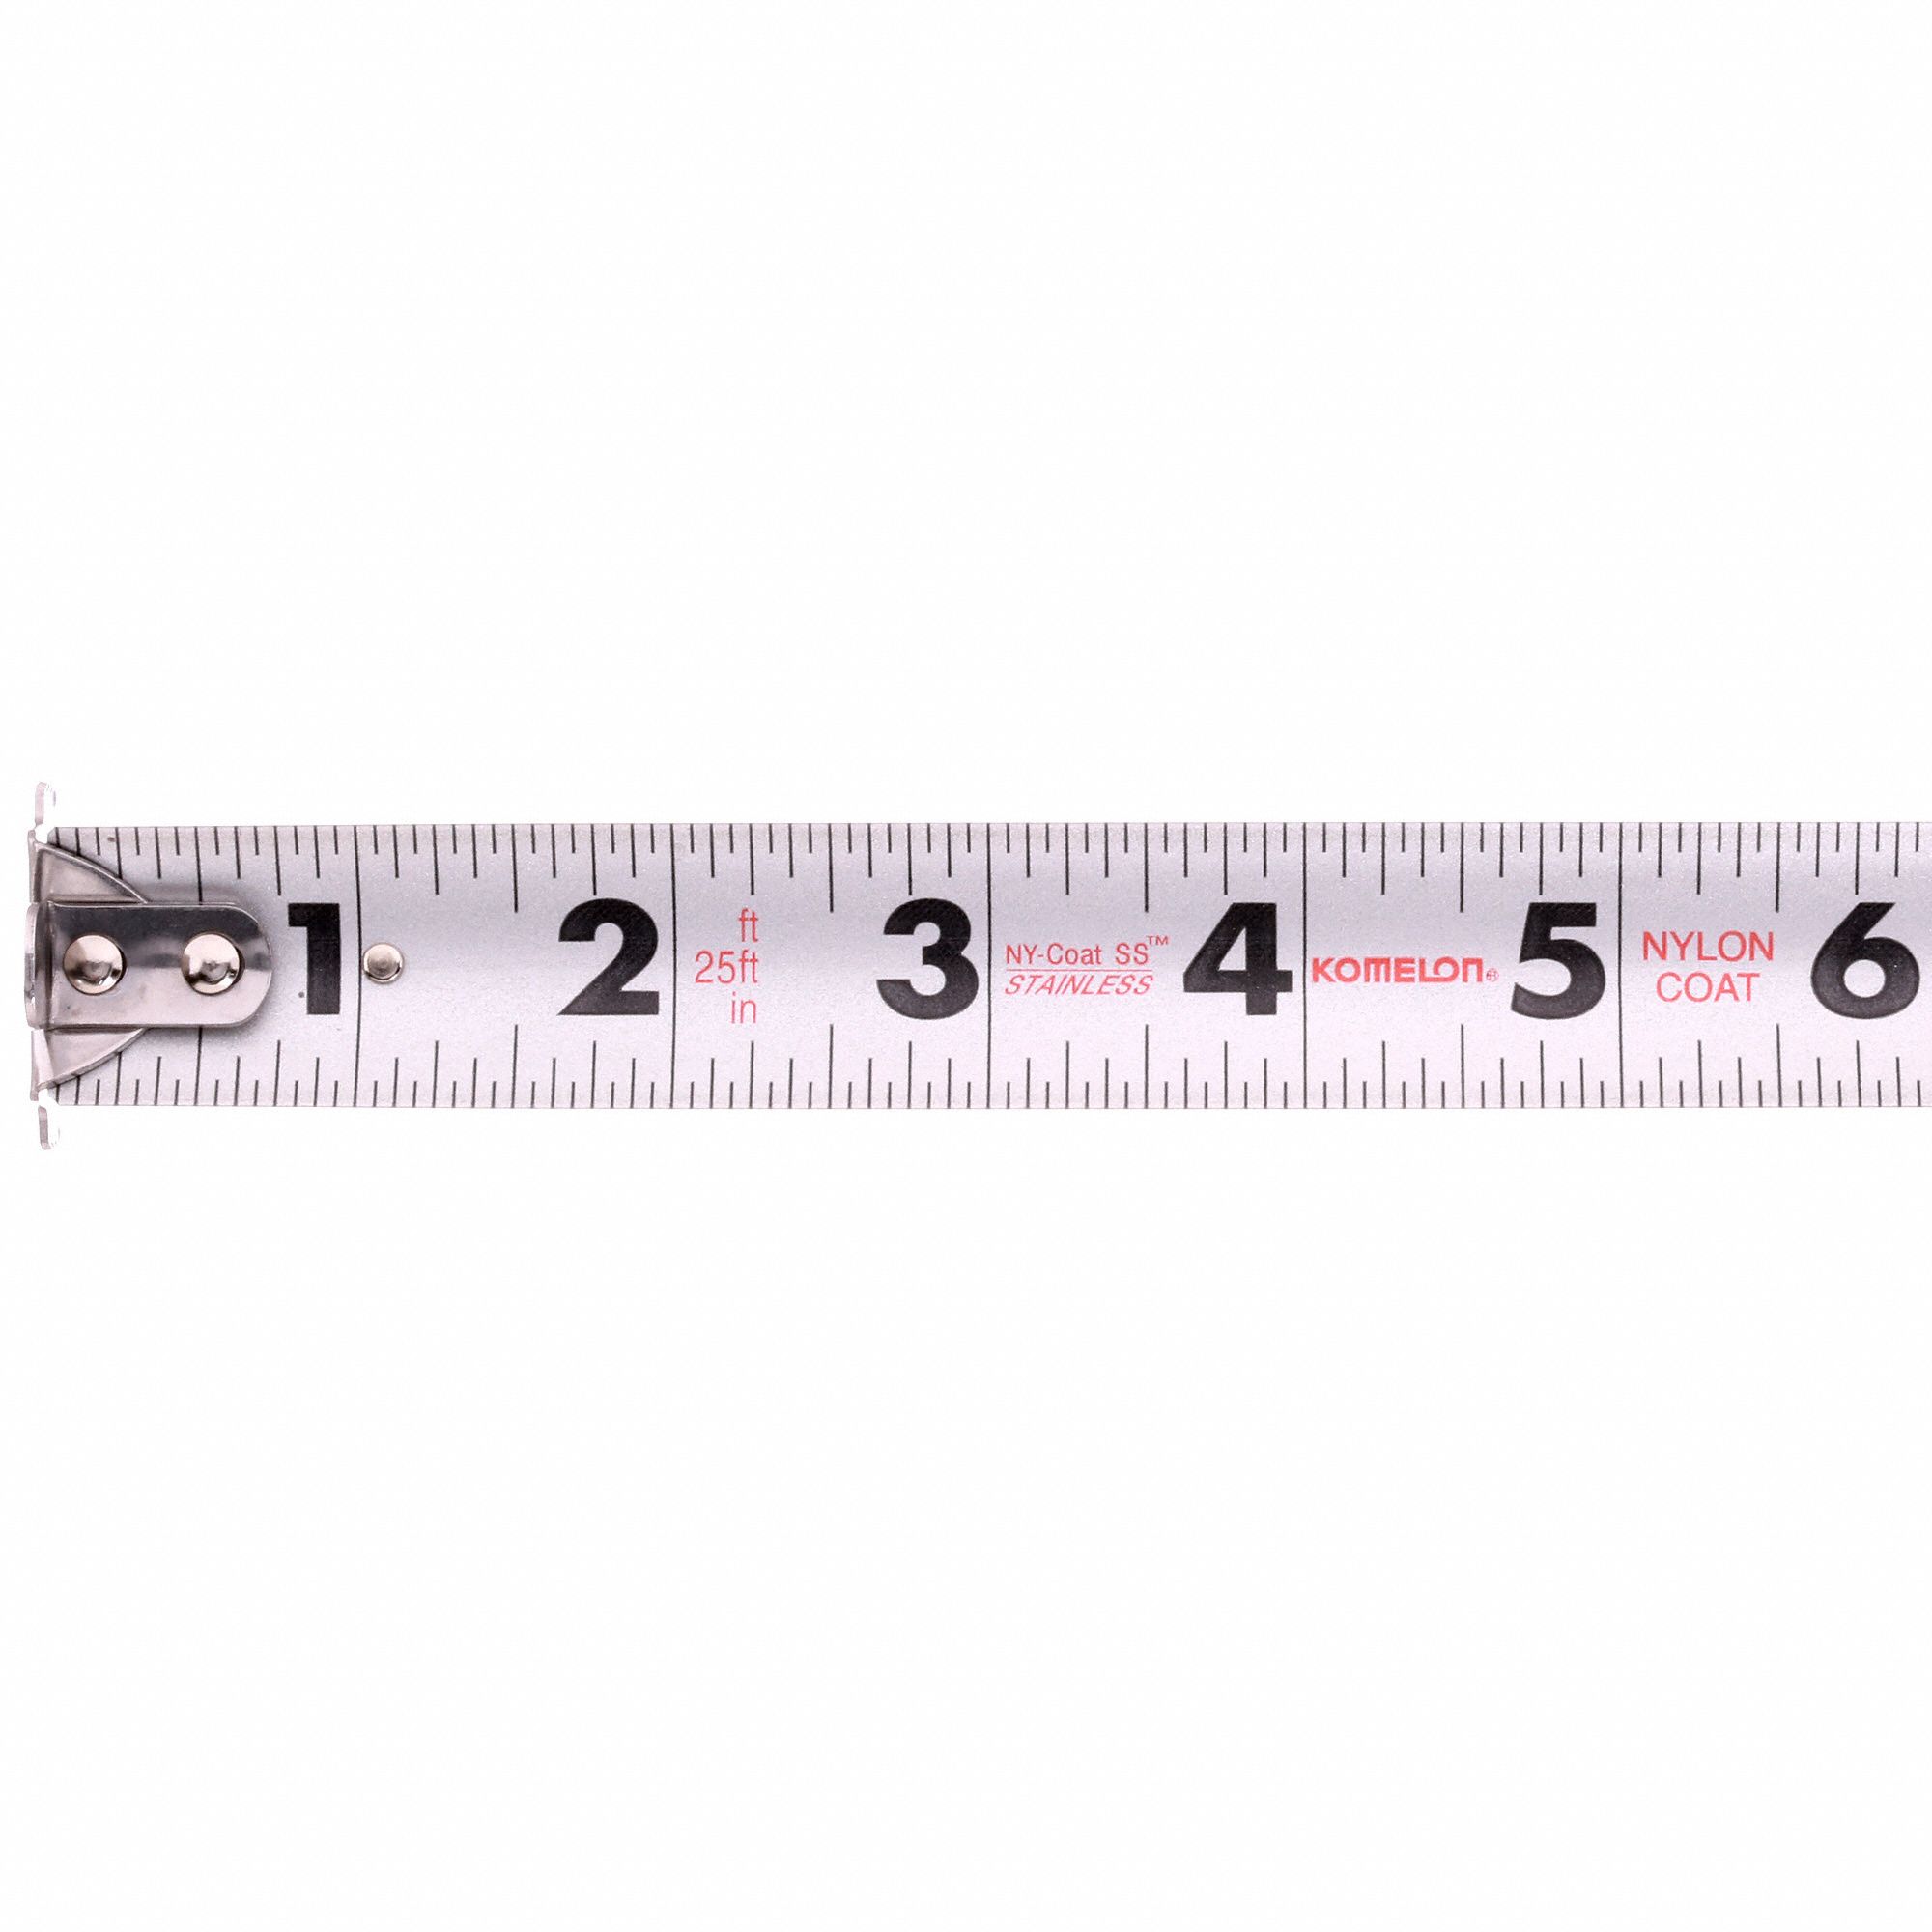 Komelon SS116 Tape Measure Stainless Steel 16 ft